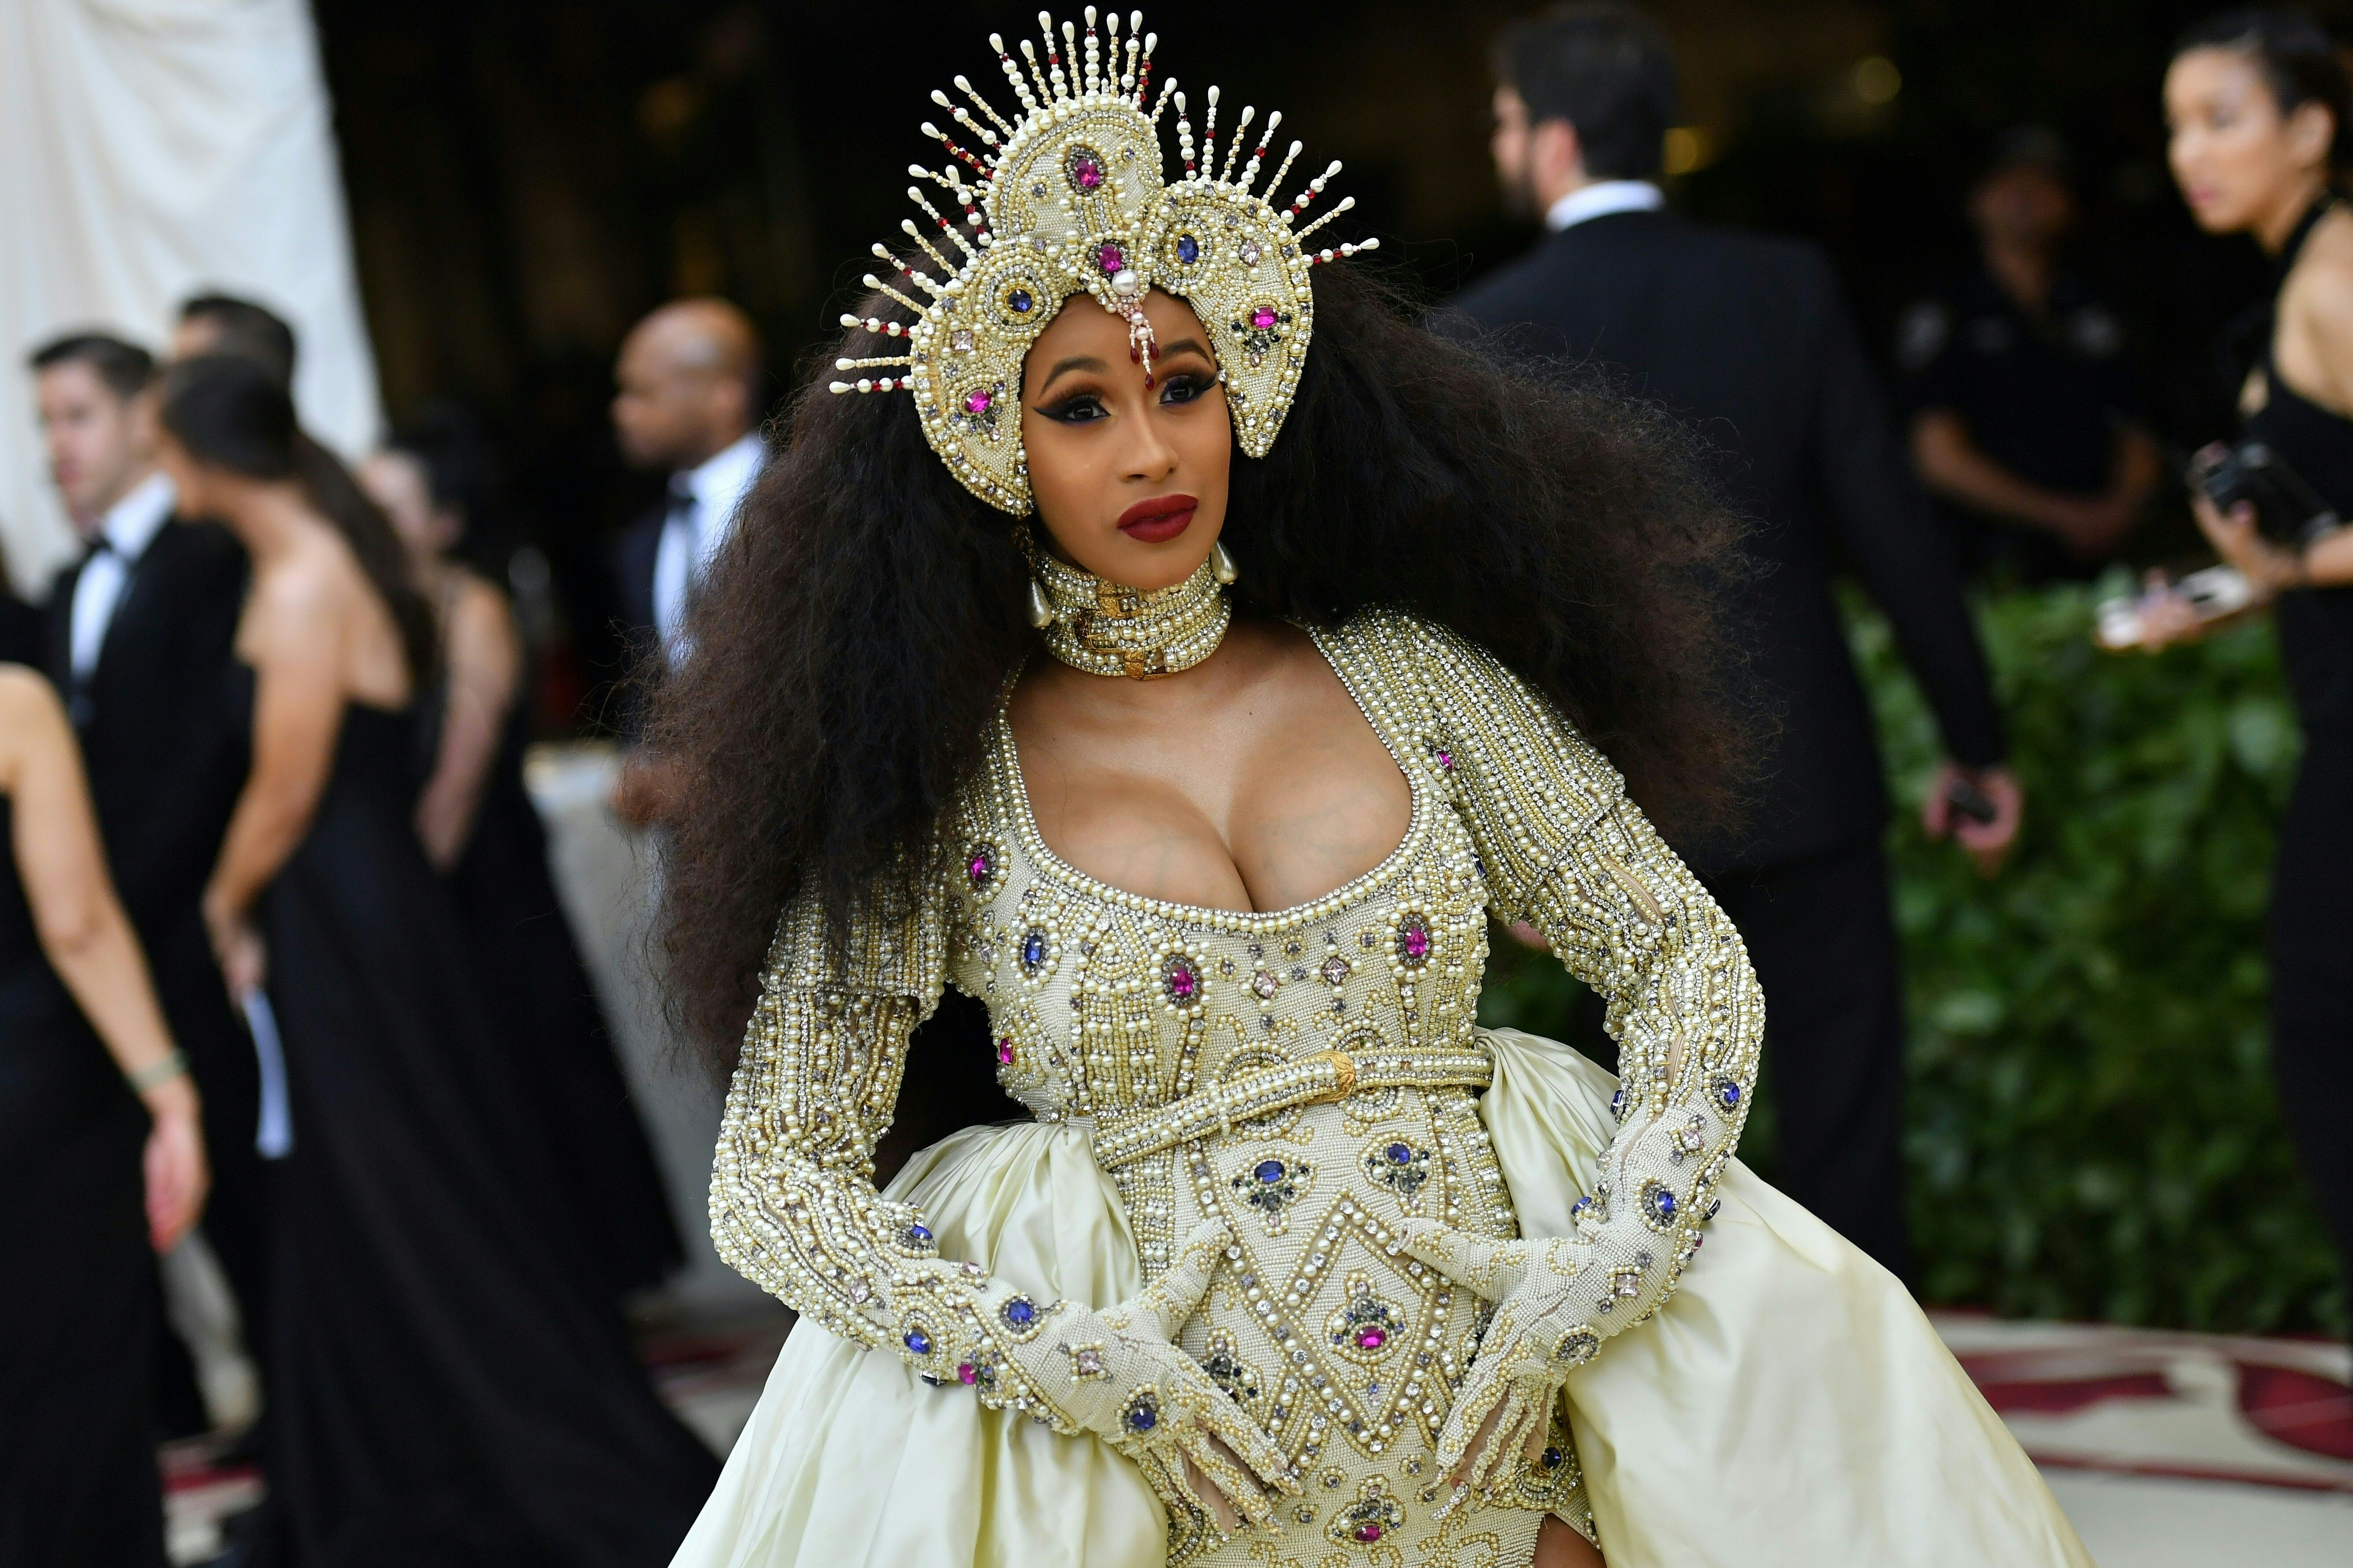 Cardi B holding her baby bump while posing for the camera.